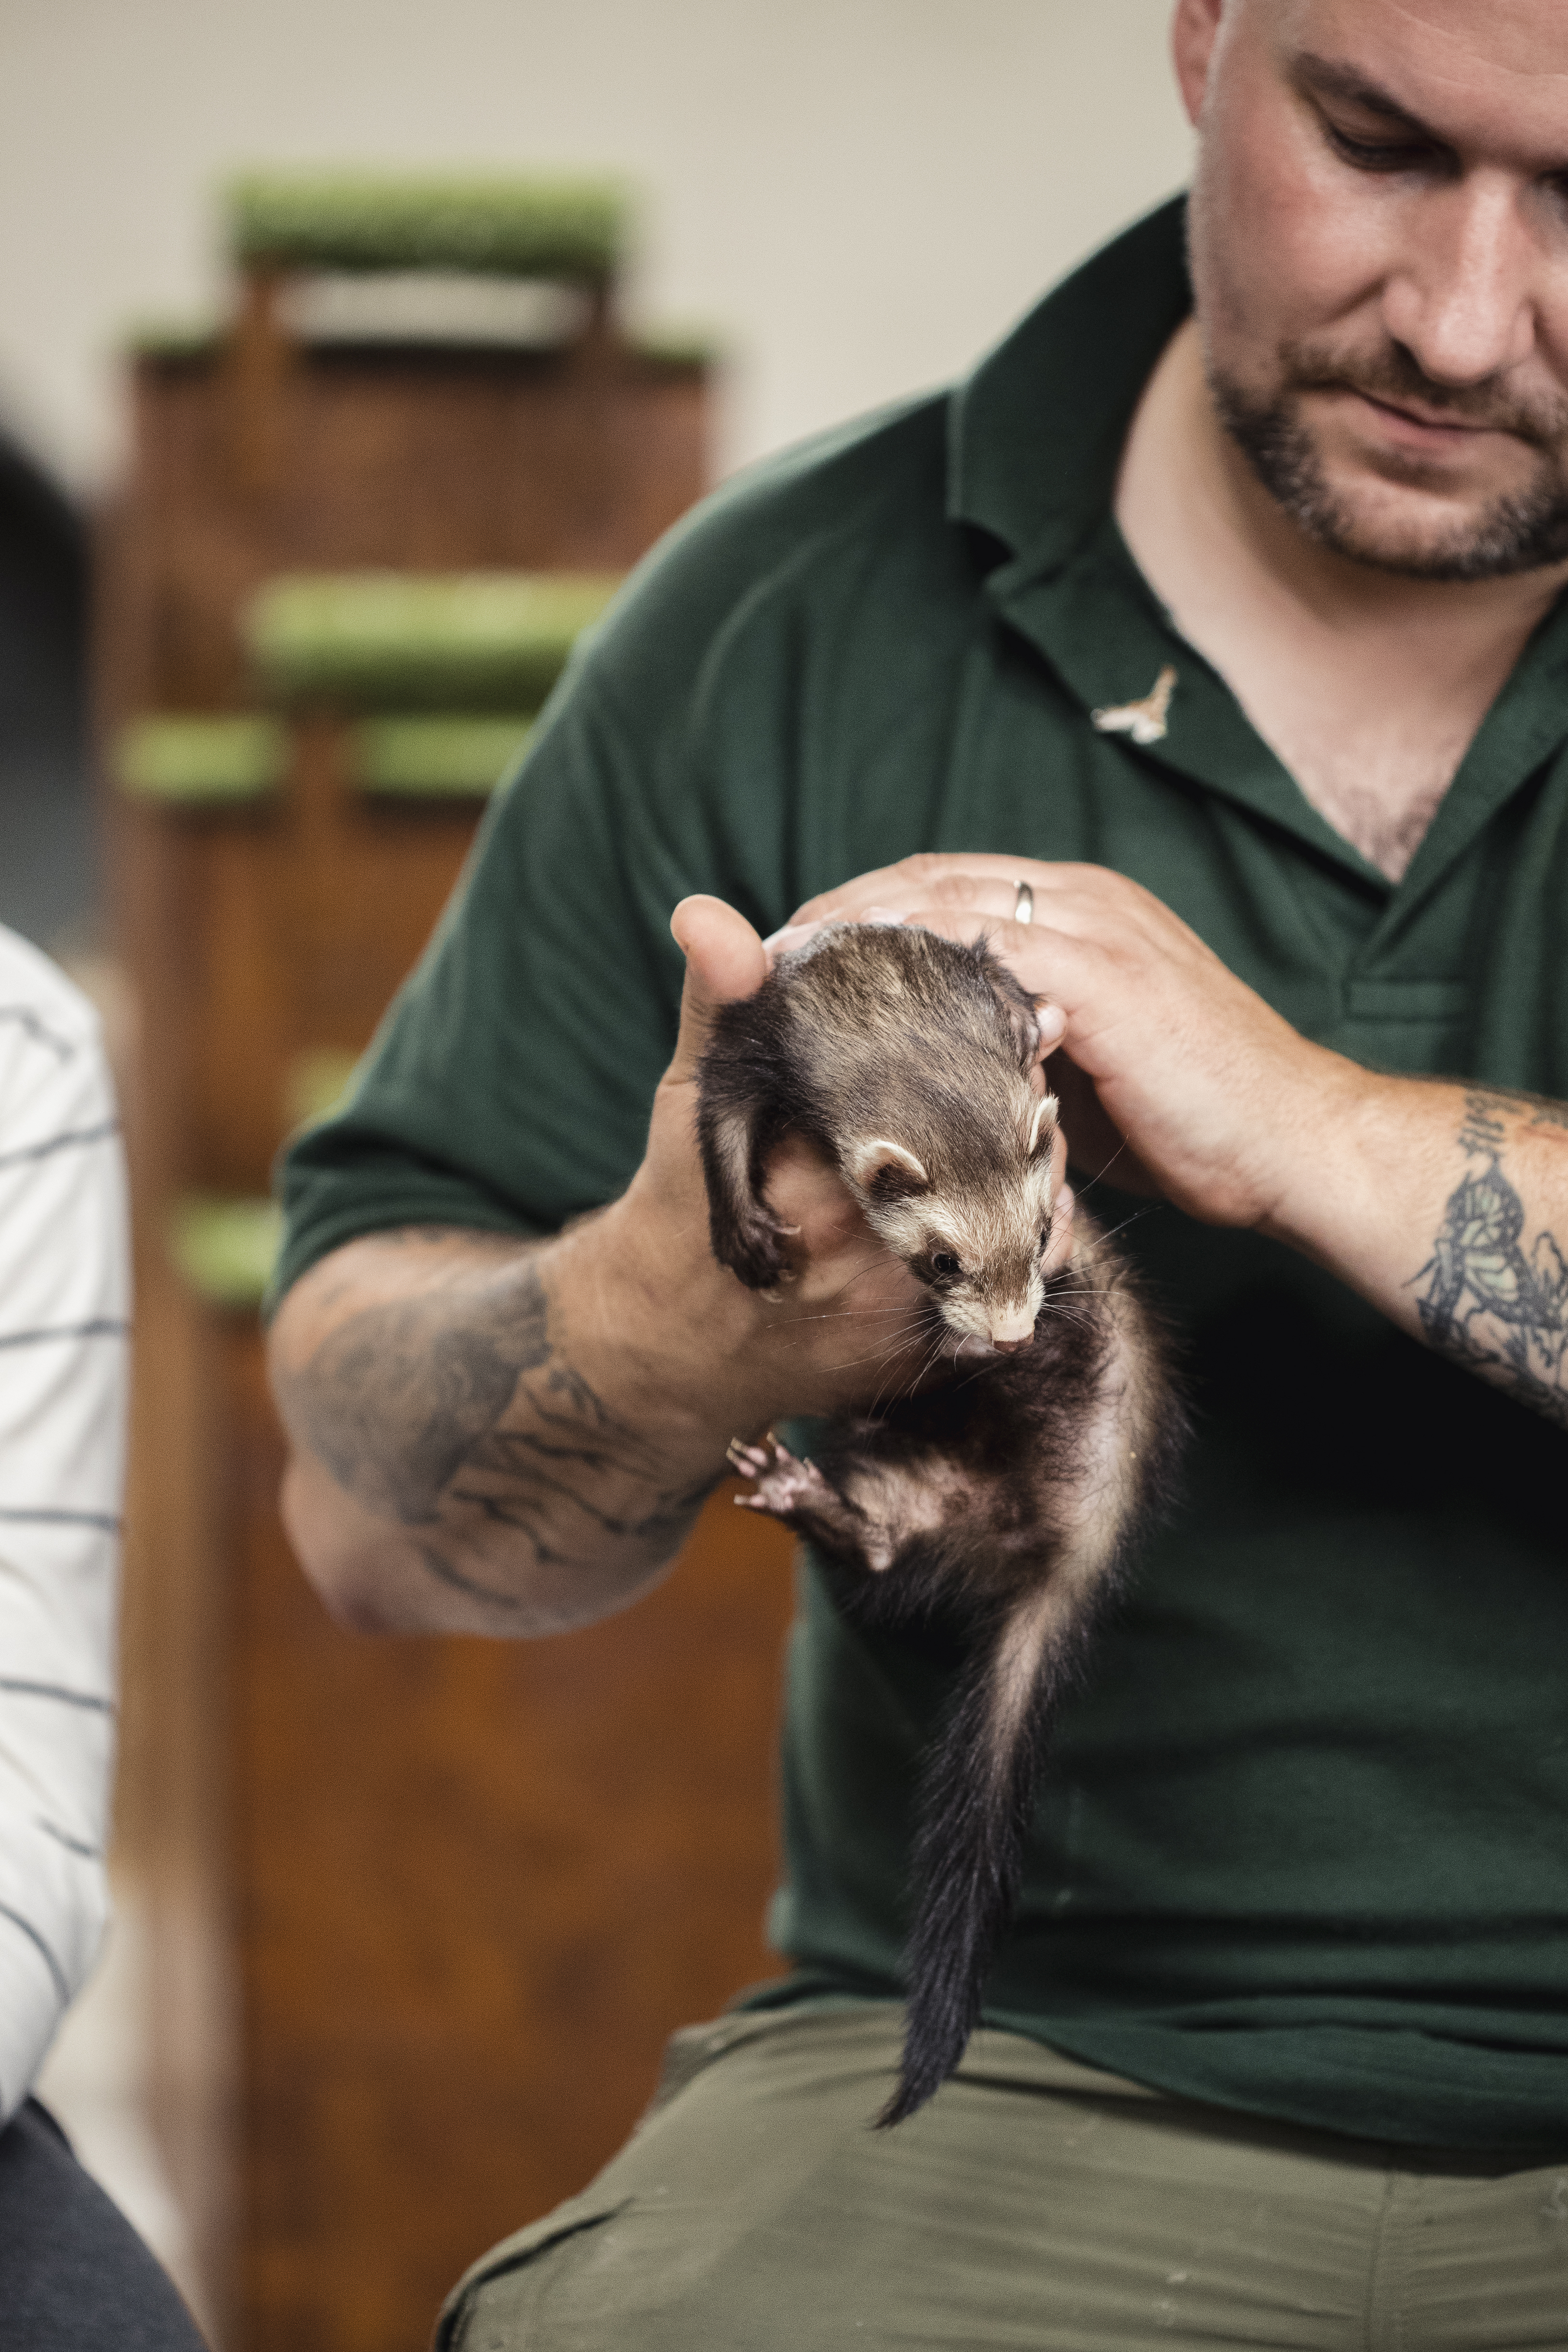 Person holding a ferret, both are indoors, with perches in the background